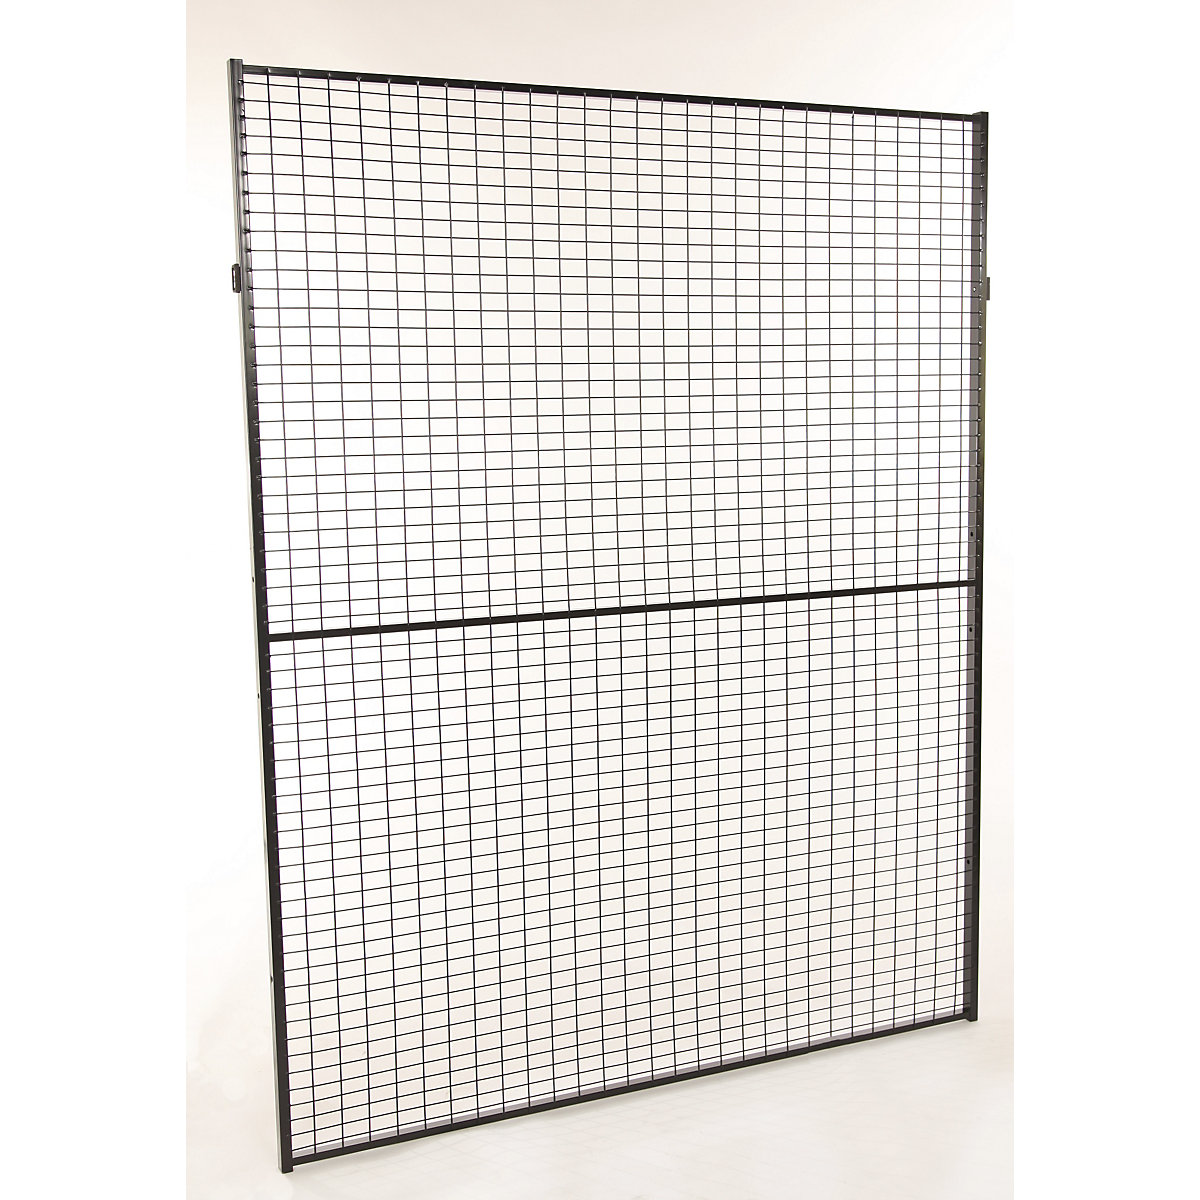 Axelent – X-GUARD CLASSIC machine protective fencing, wall section, height 1900 mm, width 1200 mm